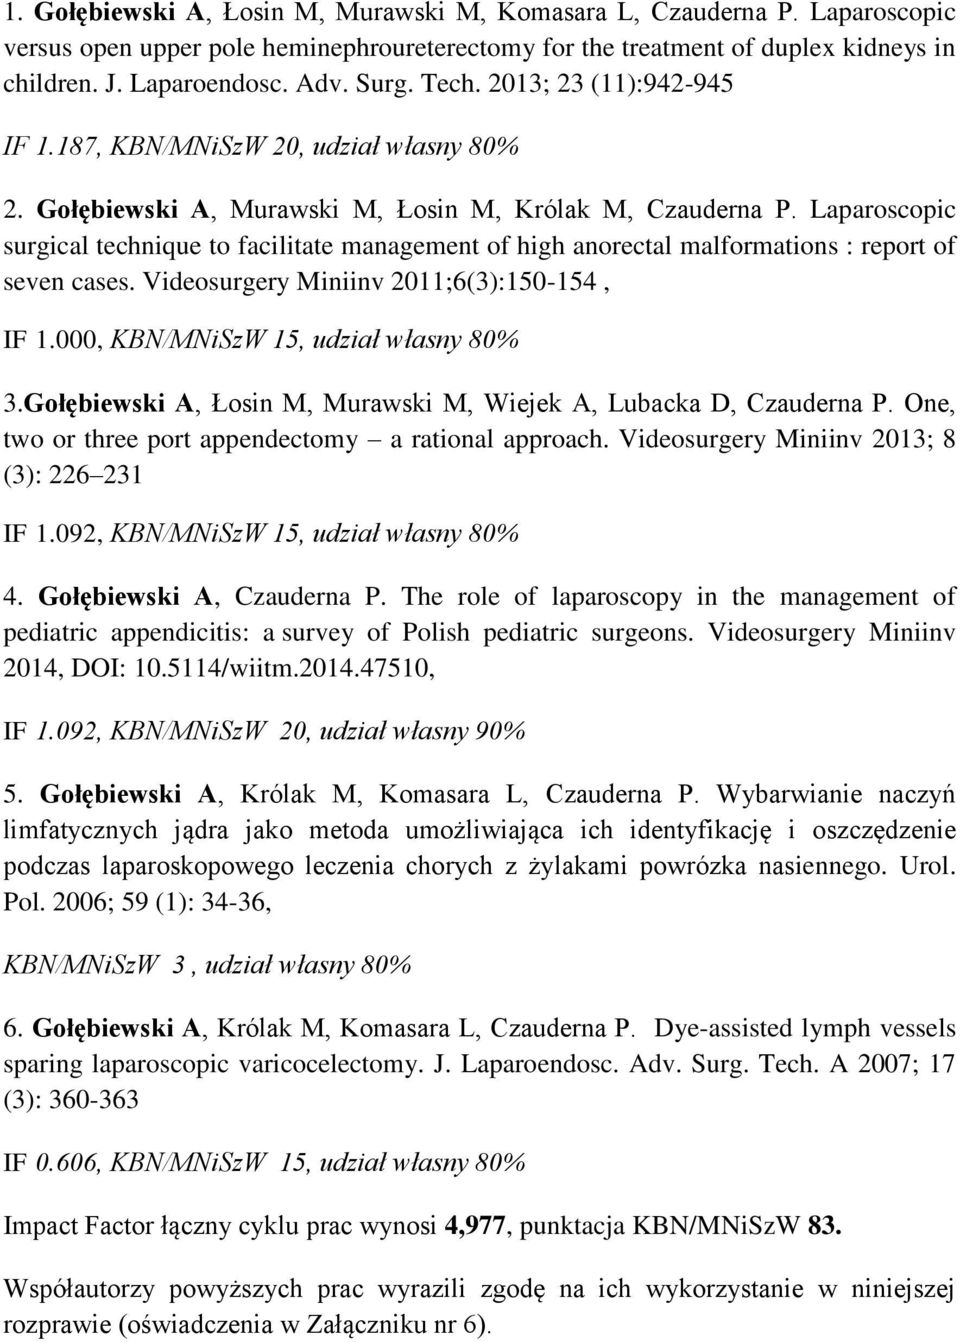 Laparoscopic surgical technique to facilitate management of high anorectal malformations : report of seven cases. Videosurgery Miniinv 2011;6(3):150-154, IF 1.000, KBN/MNiSzW 15, udział własny 80% 3.